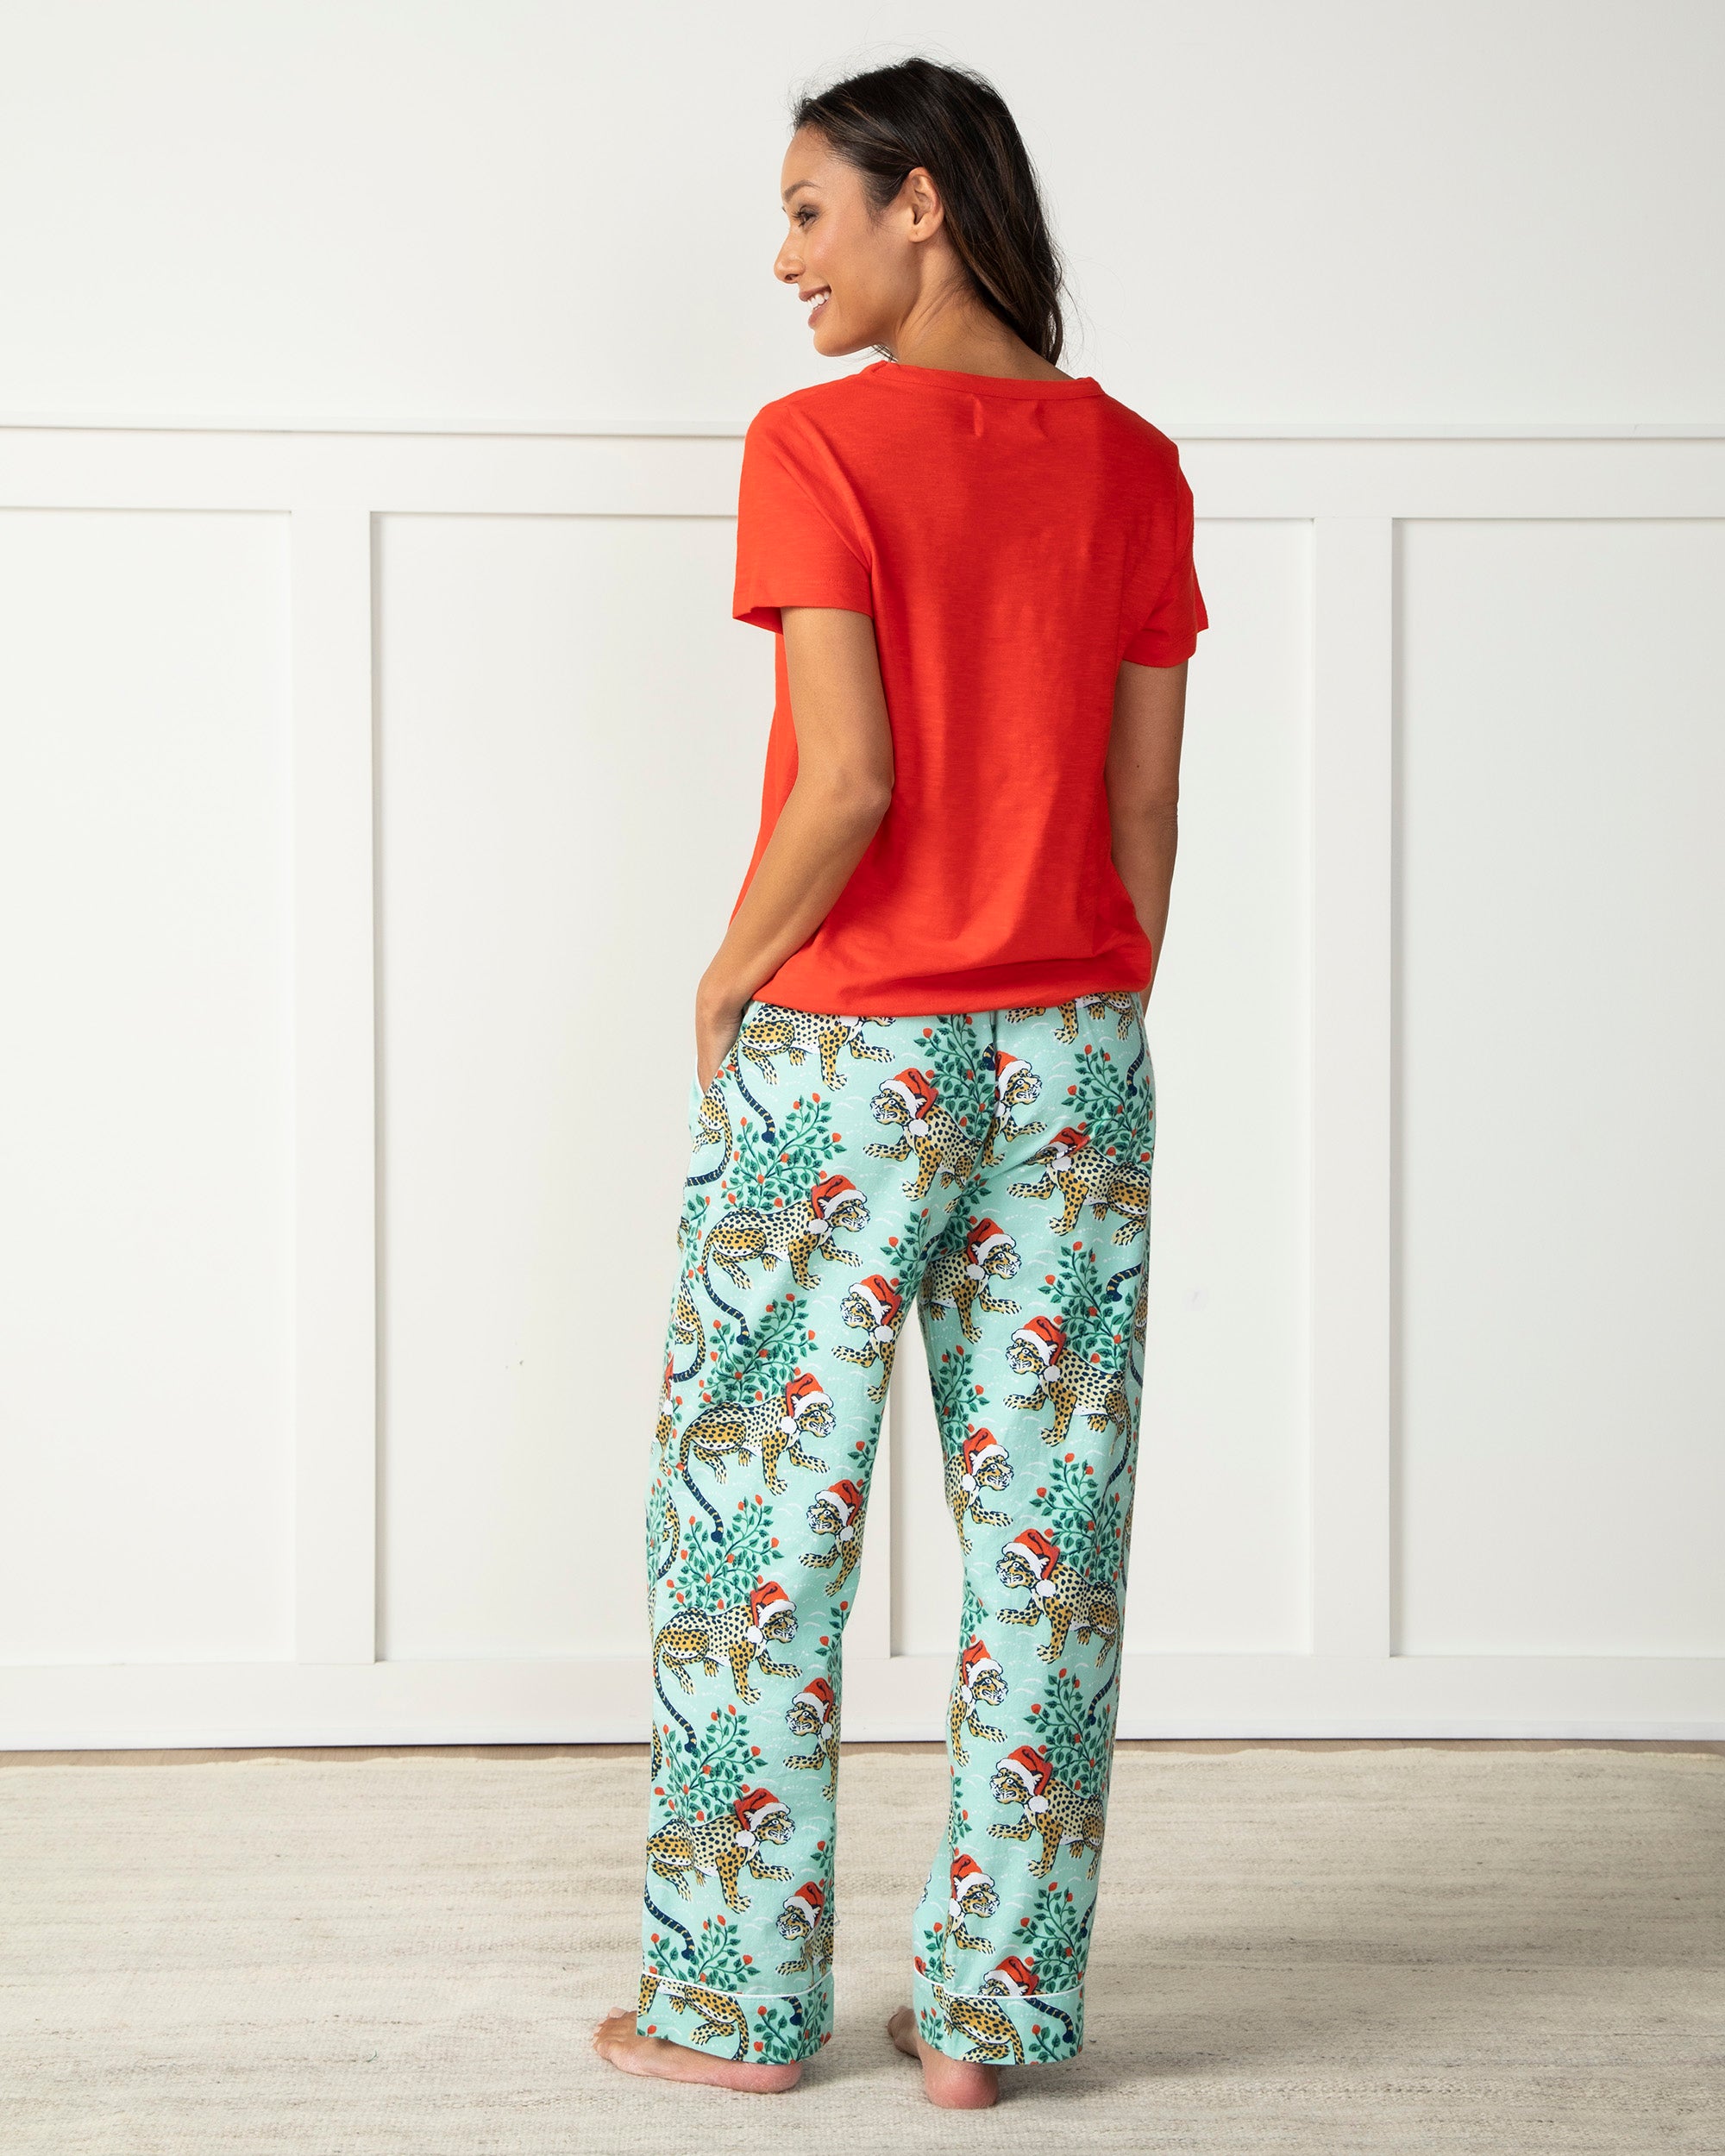 Holly Jolly Bagheera - Flannel Pajama Pants - Frosted Mint - Printfresh